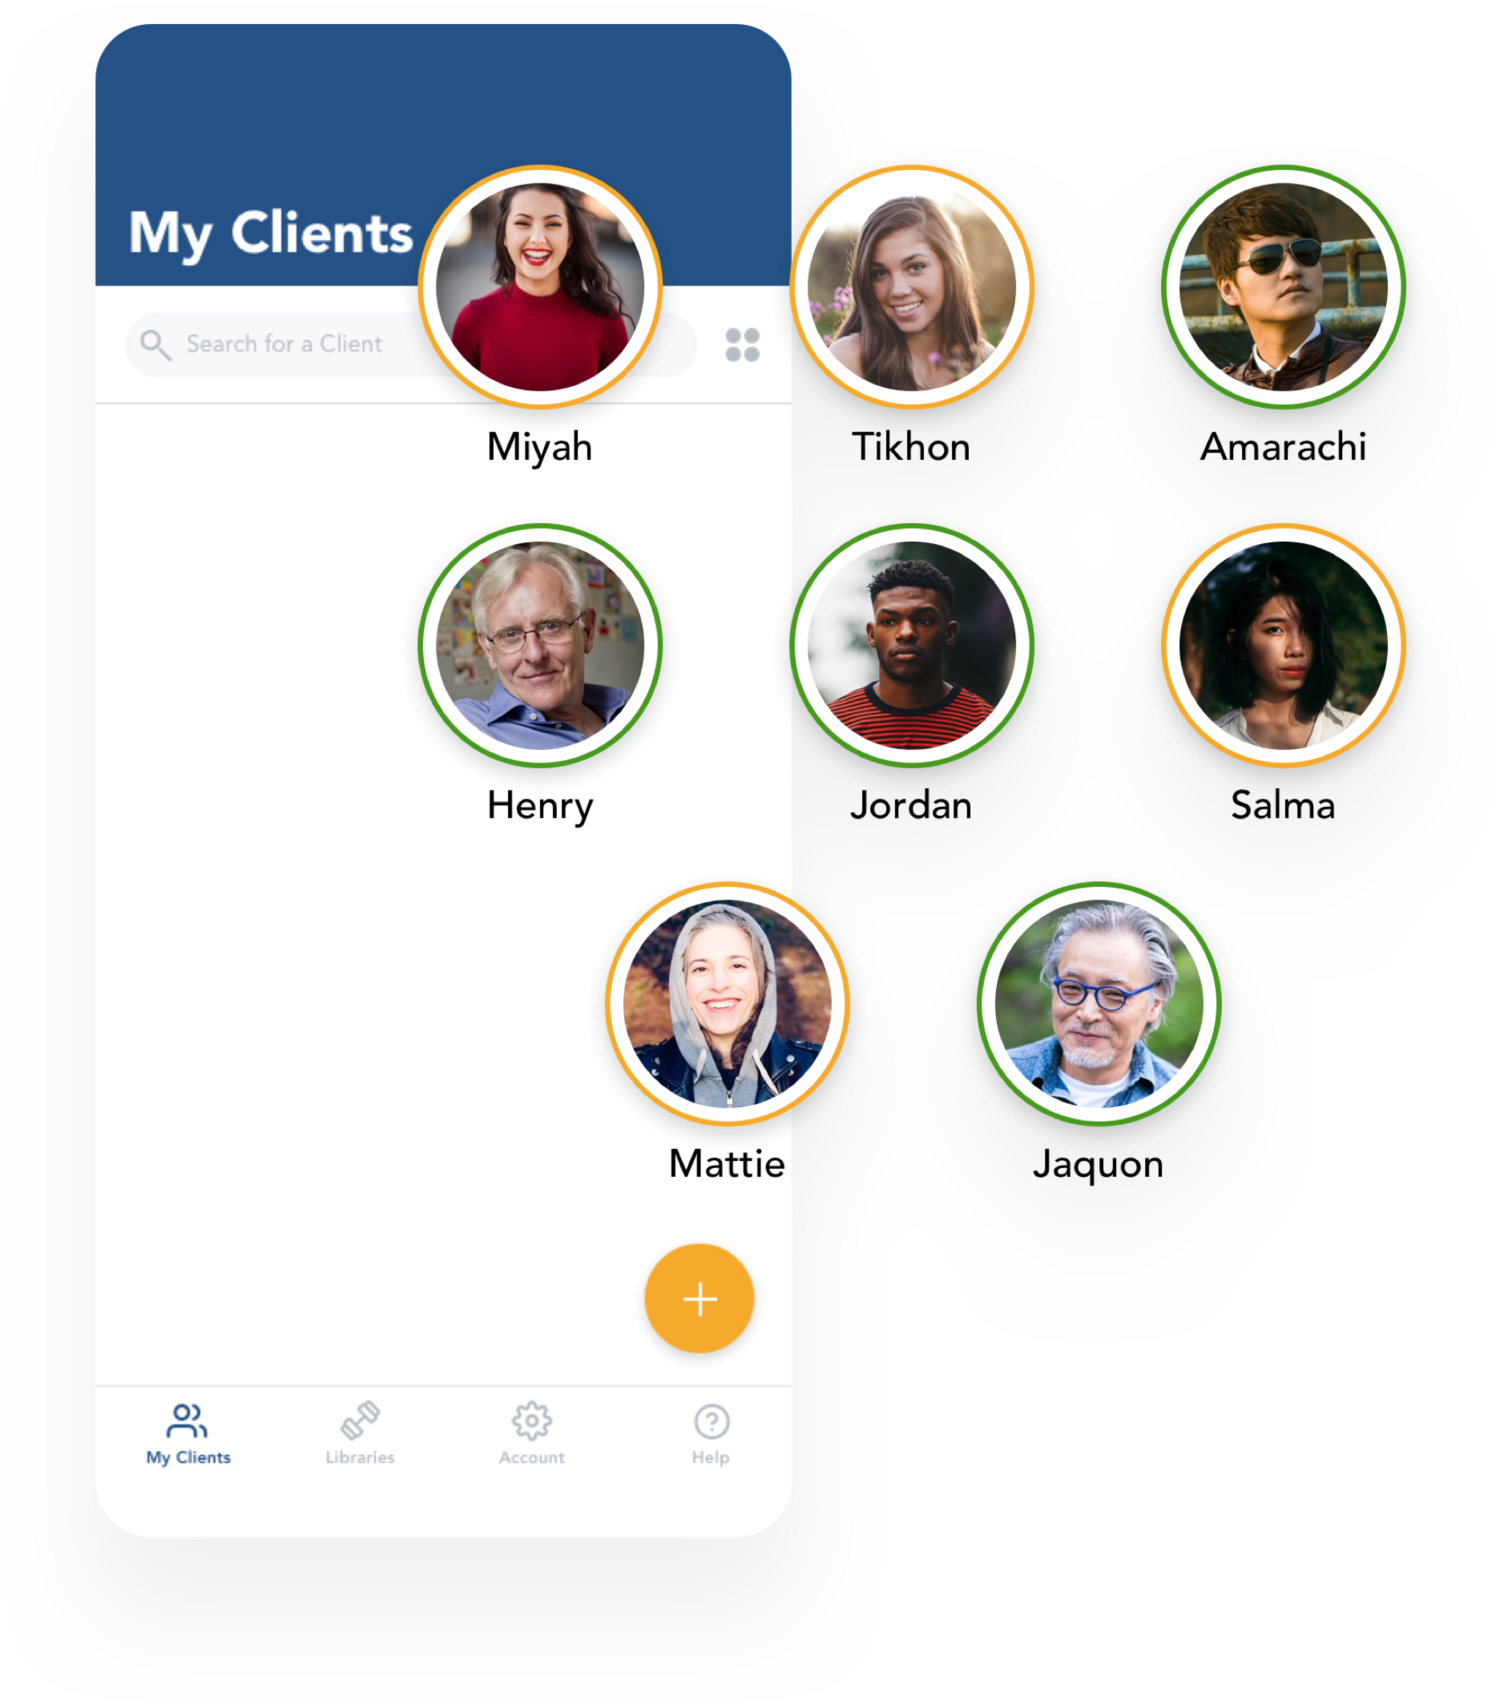 Manage My Clients in App screen